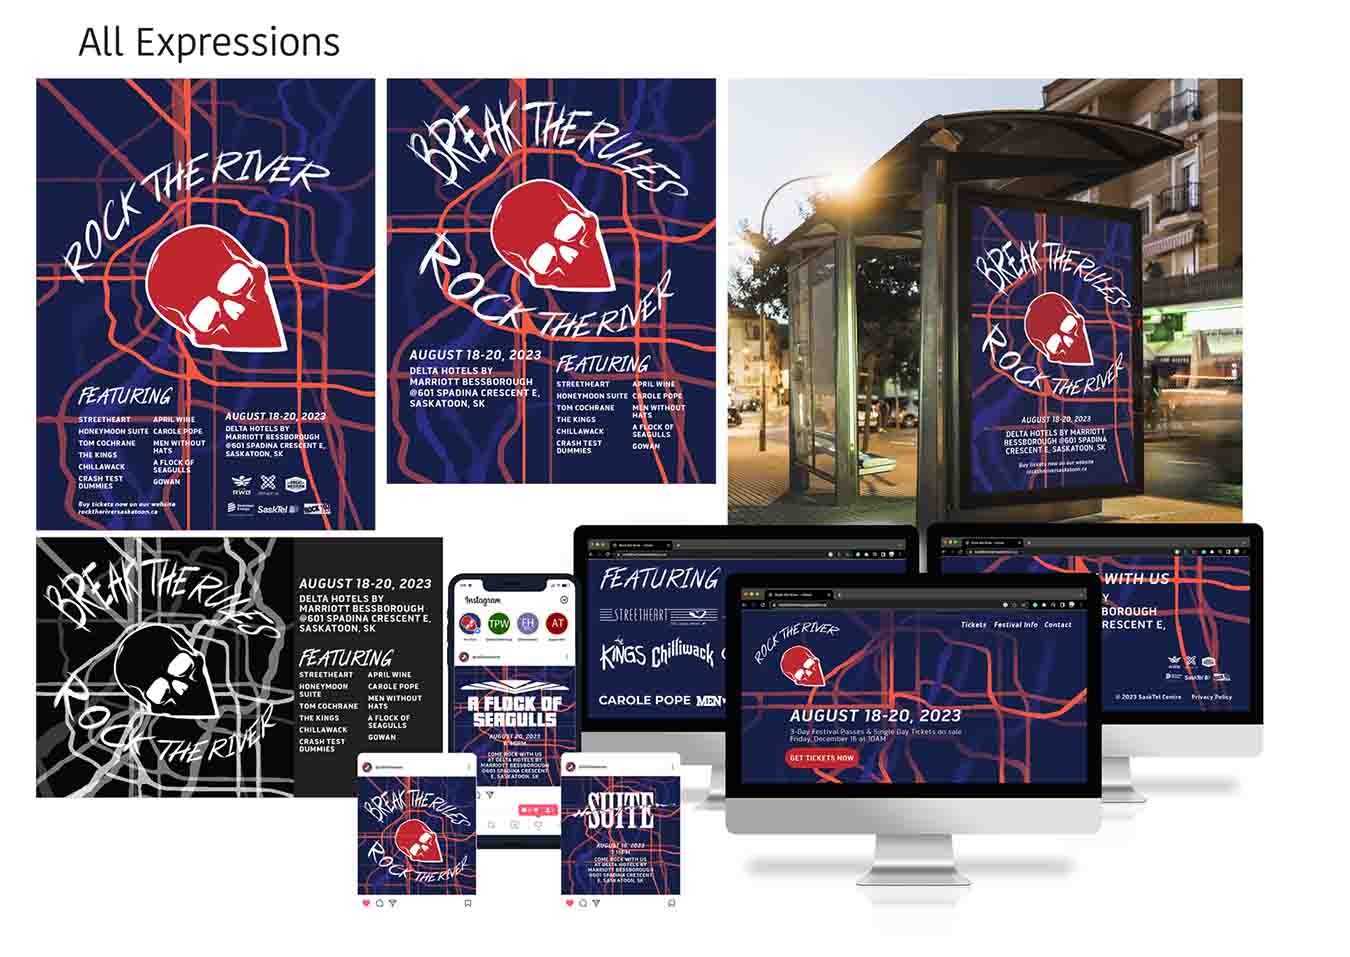 collection of all event promotion expressrions including vairous posters and bus shelter ads, a full website landing page and social media posts